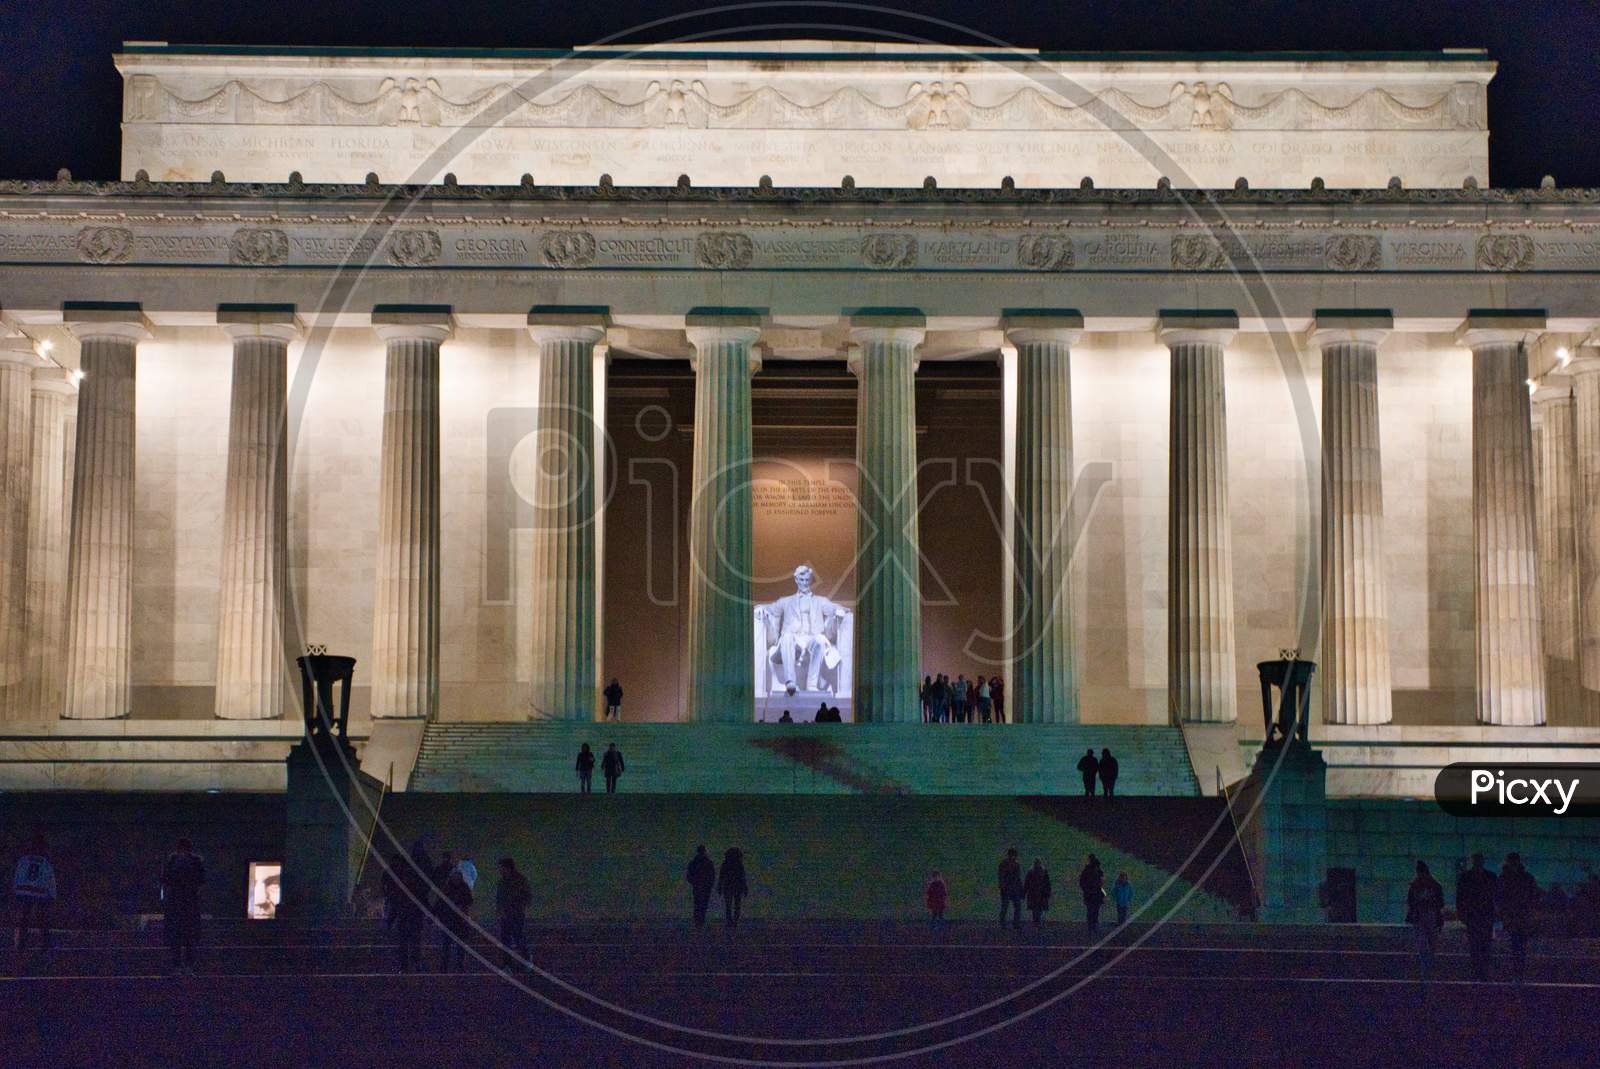 View of the Lincoln Memorial at night